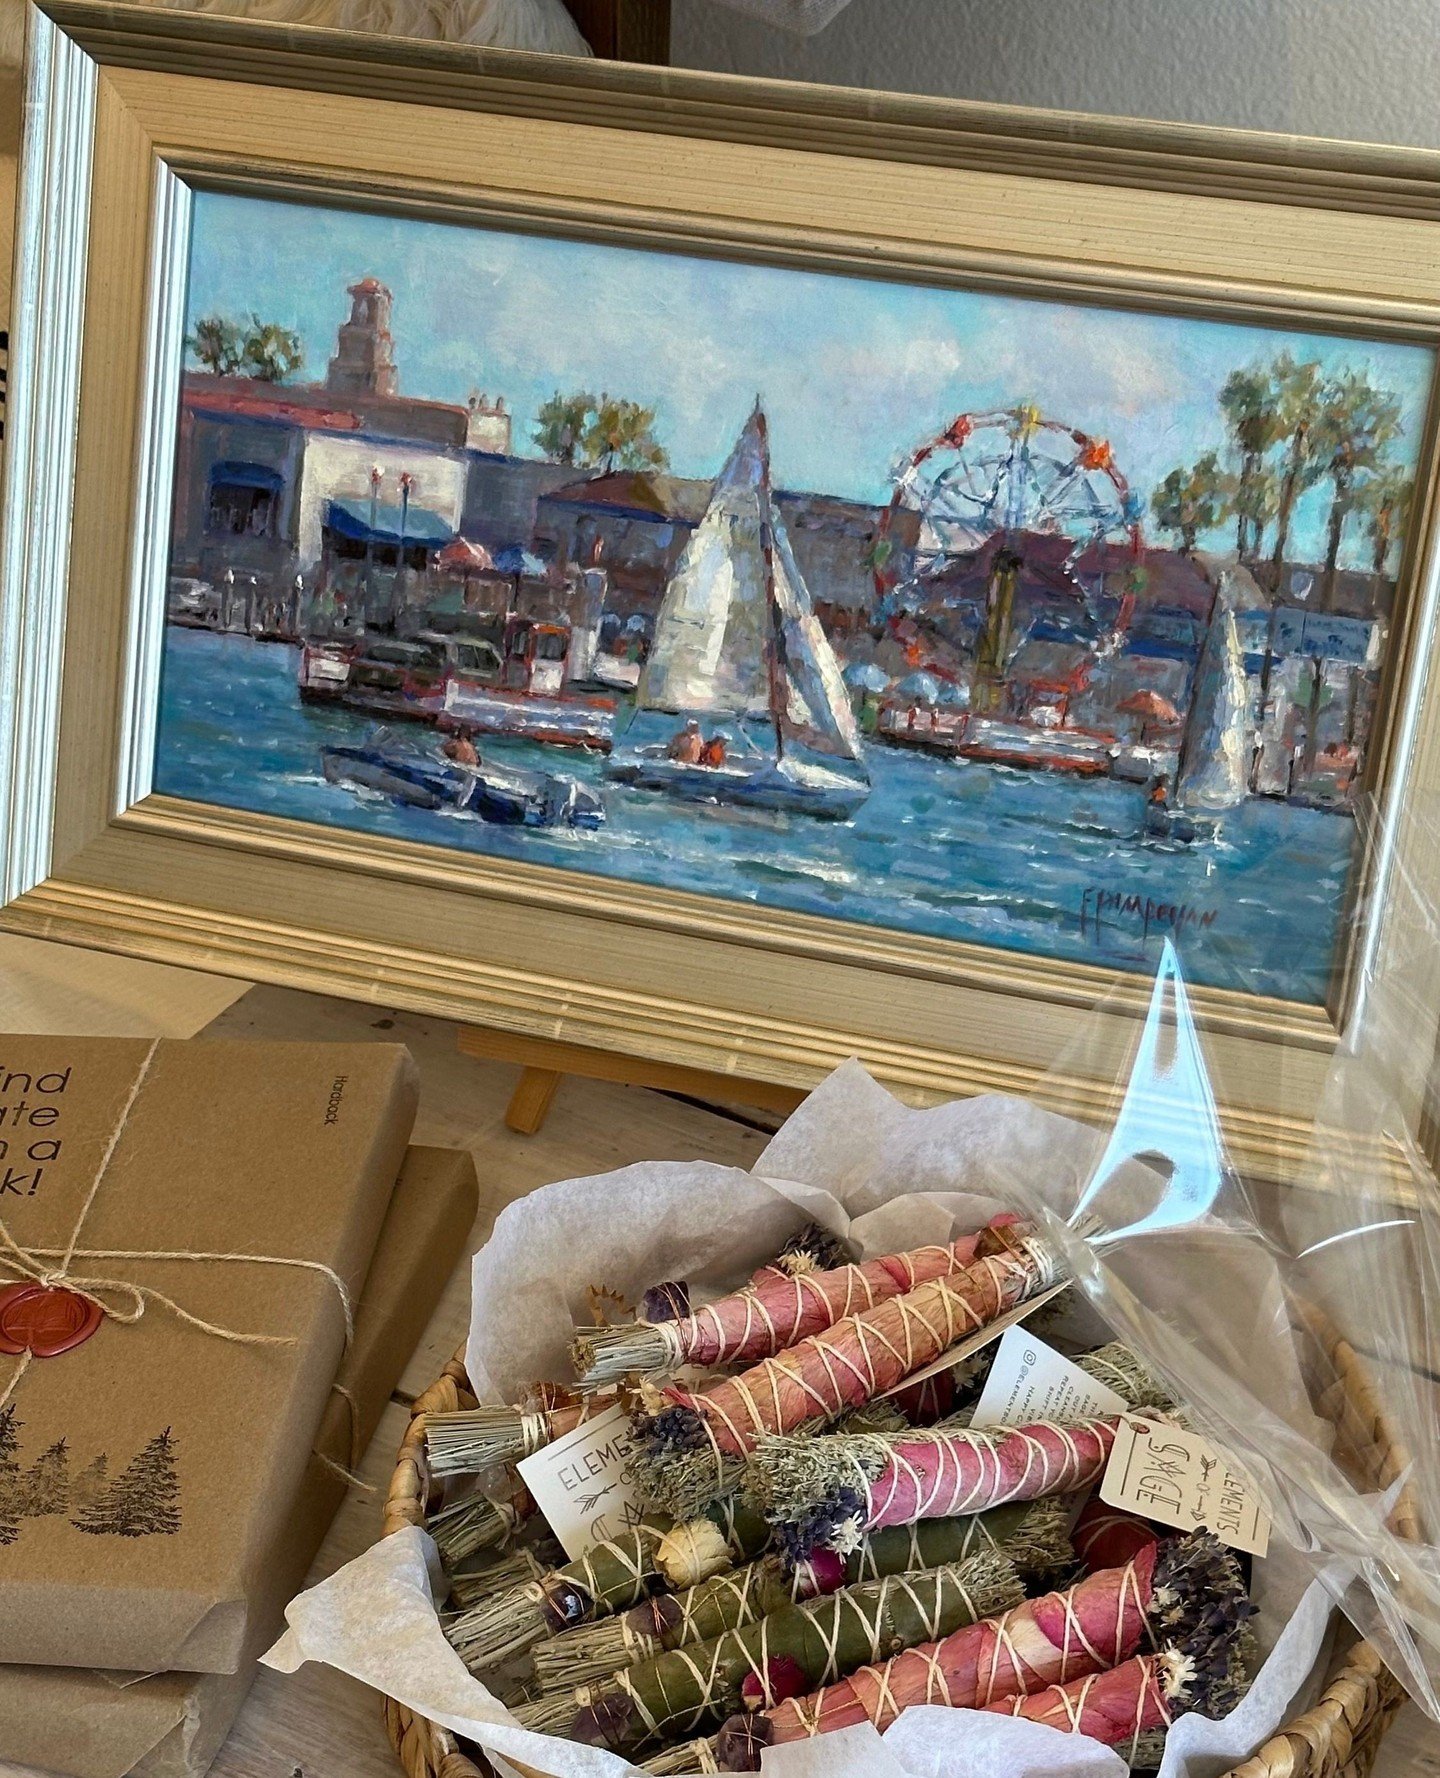 Join us Sunday, May 19th for the Balboa Island Art Walk &amp; enjoy 10% OFF all art!⁠
⁠
Stop in Coterie &amp; Cie on Marine Ave. to explore our full art collection including vintage oil paintings from Europe, unique works by local artists, and more.⁠